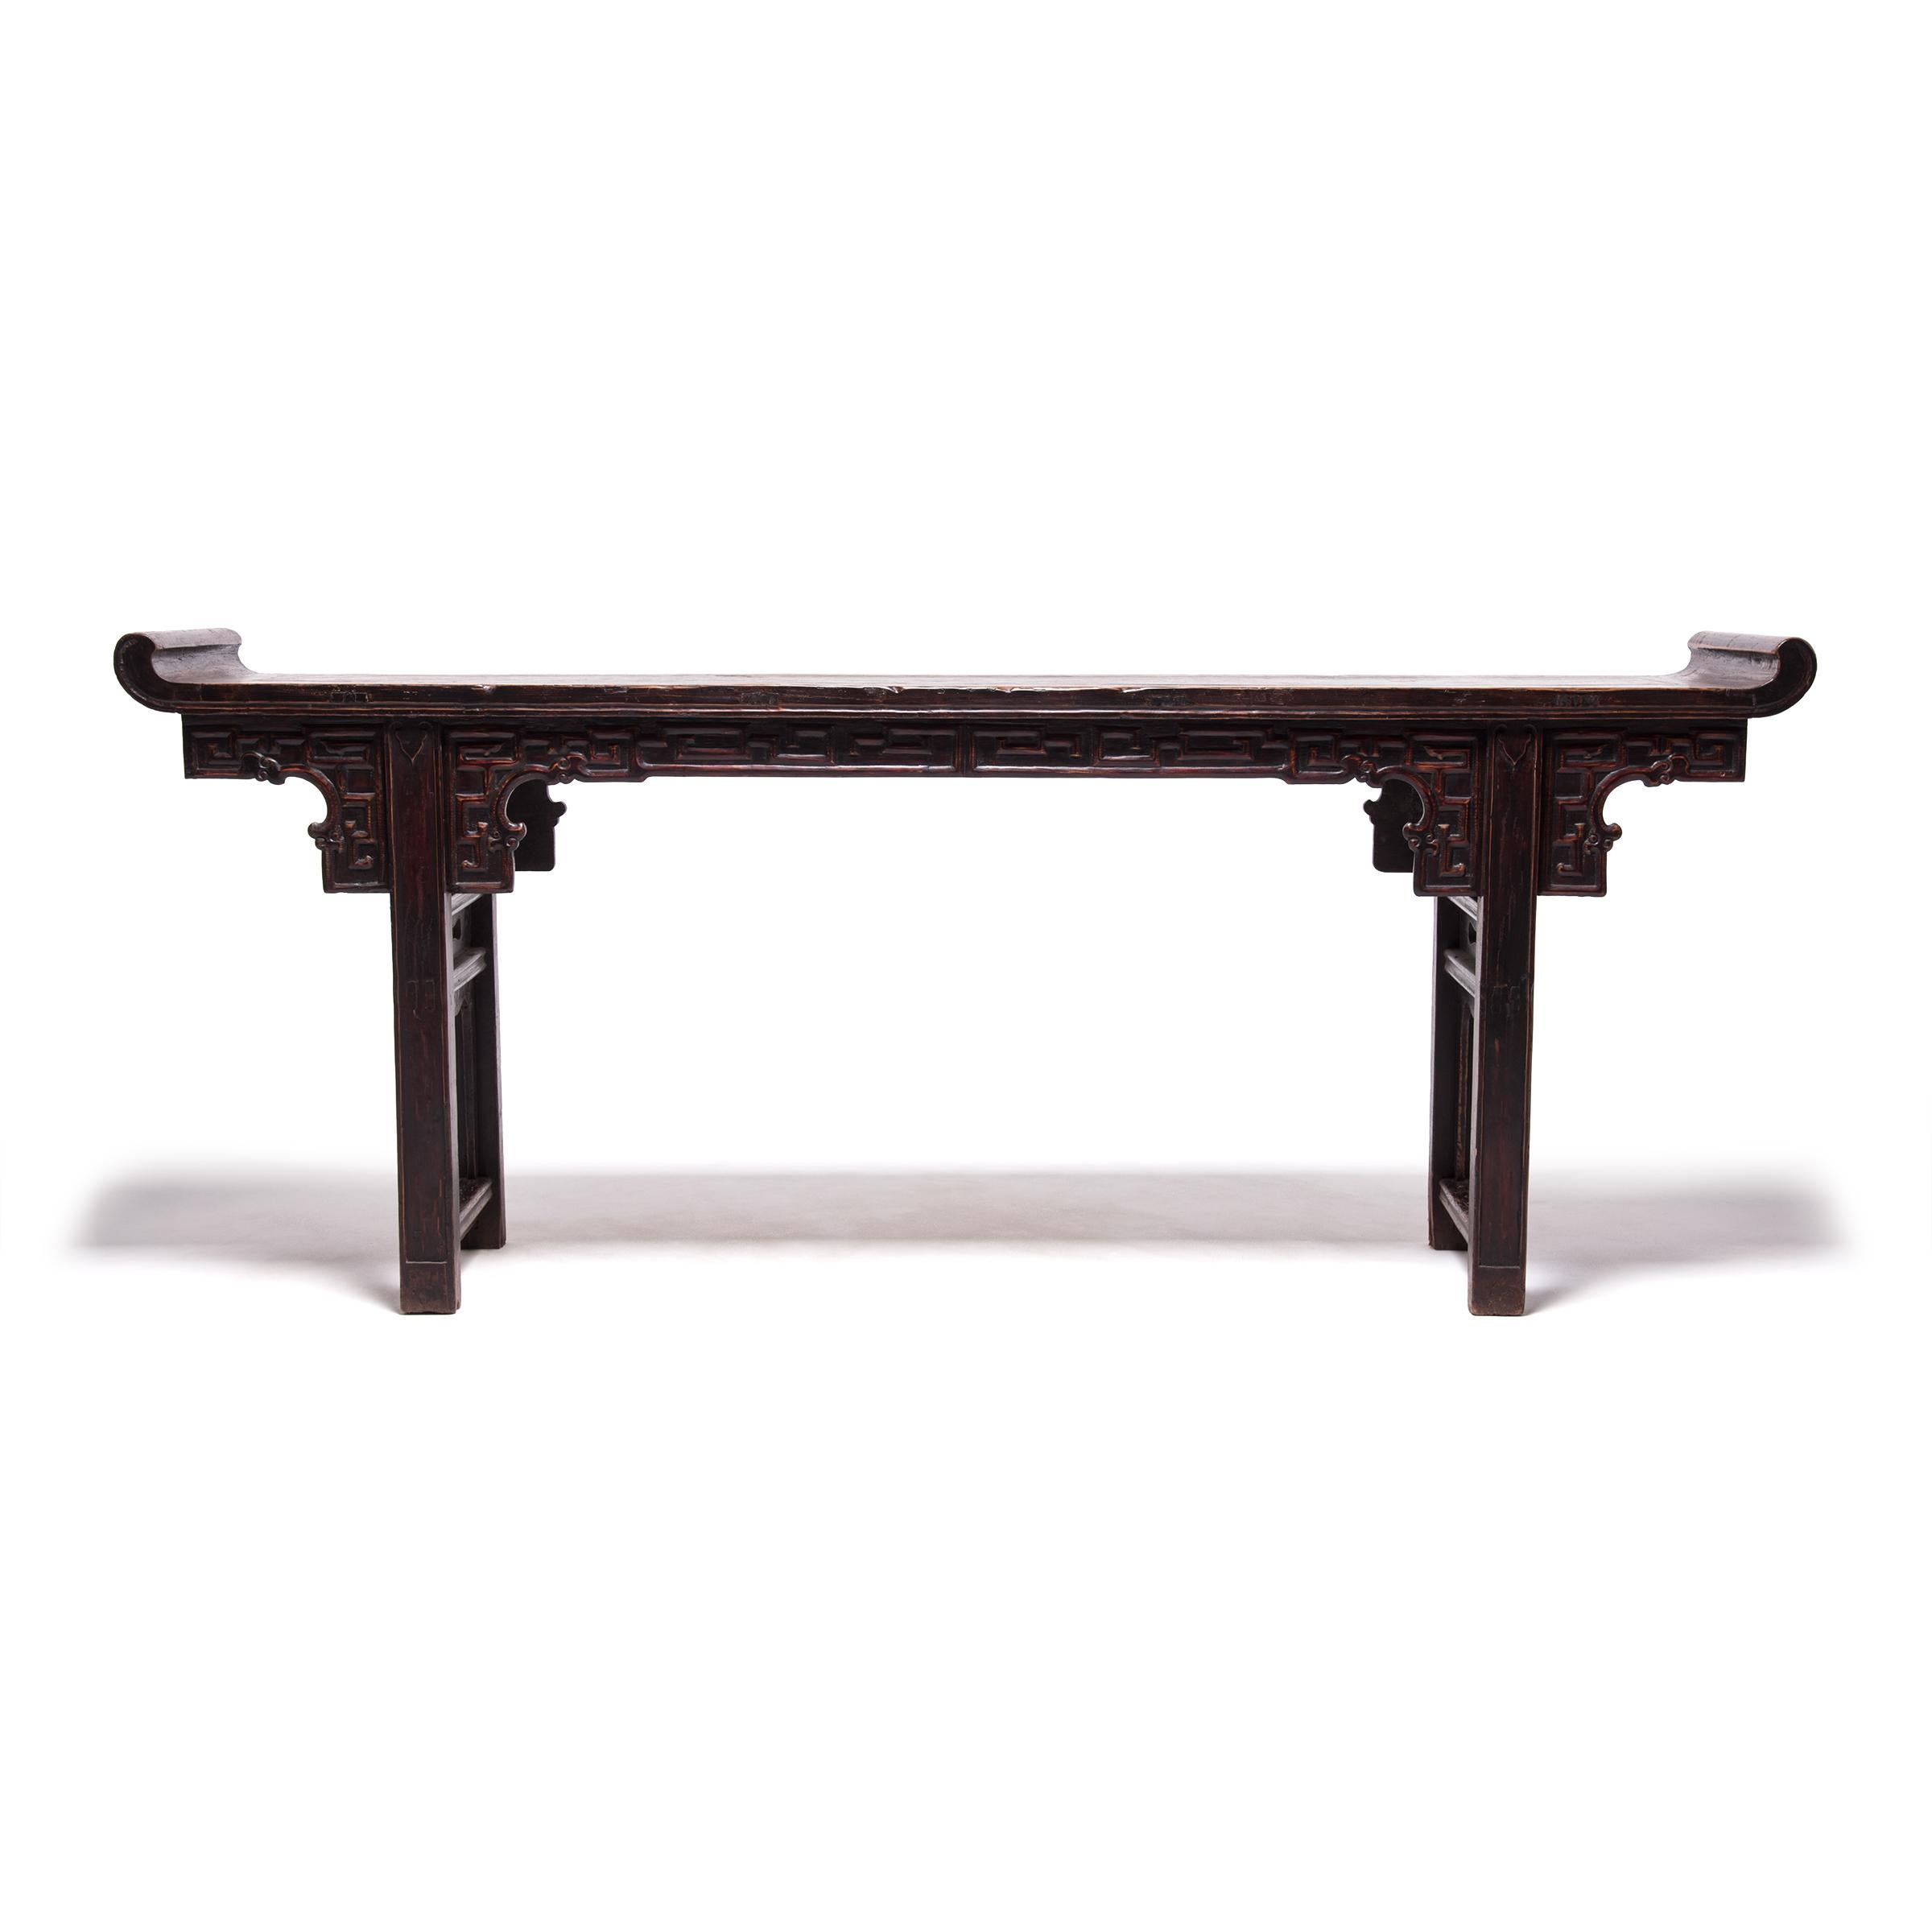 Chinese Altar Table with Everted Ends, c. 1800 In Good Condition For Sale In Chicago, IL